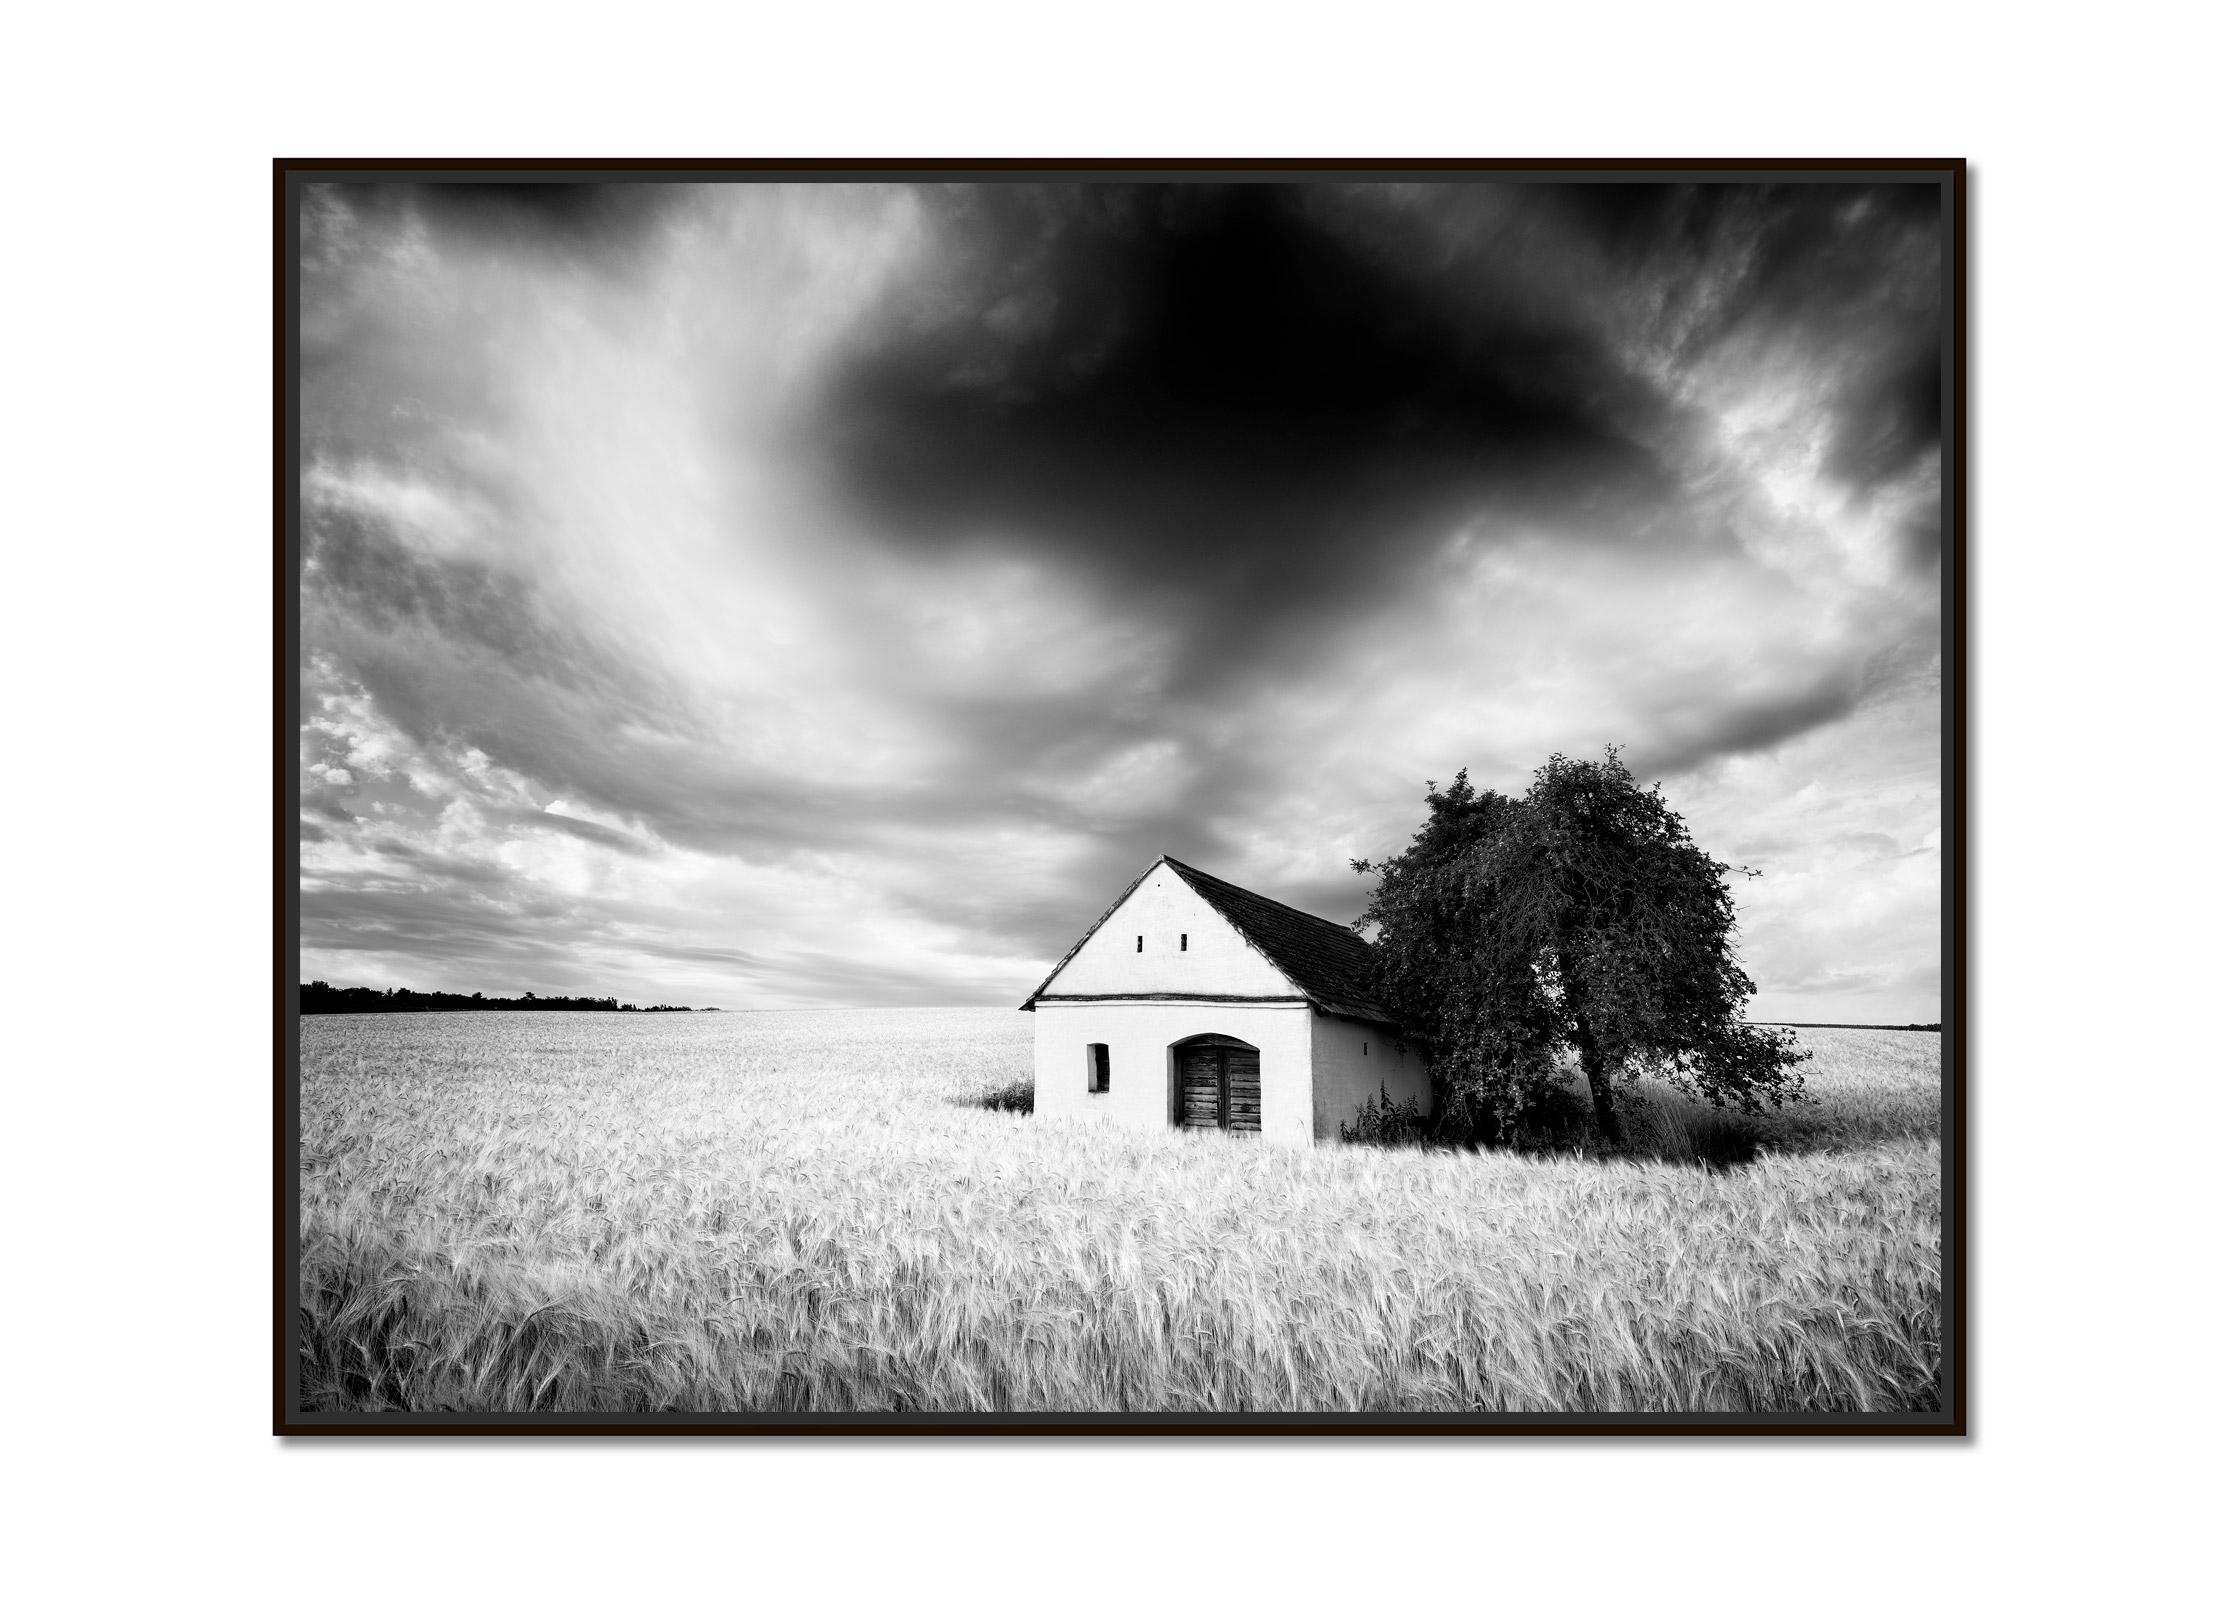 Wine Press House, cornfield, Giant Cloud, black and white photography, landscape - Photograph by Gerald Berghammer